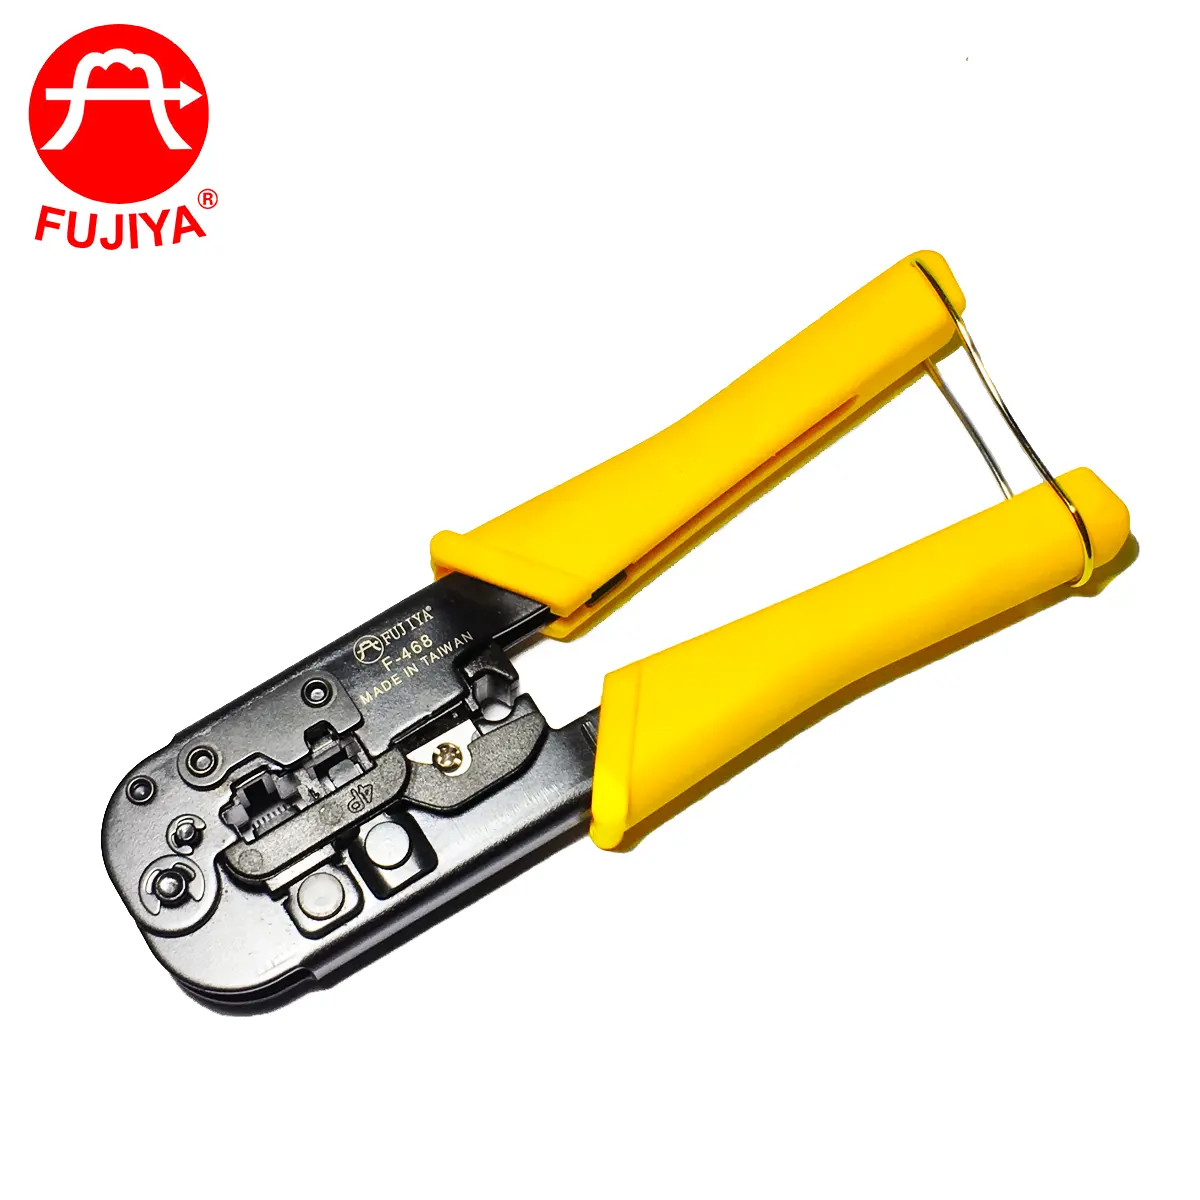 Taiwan 4P4C 6P6C 8P8C Multi Purpose Crimping Plier l SPCC steel body with SK-5 blade l wire crimping stripping and cutting l